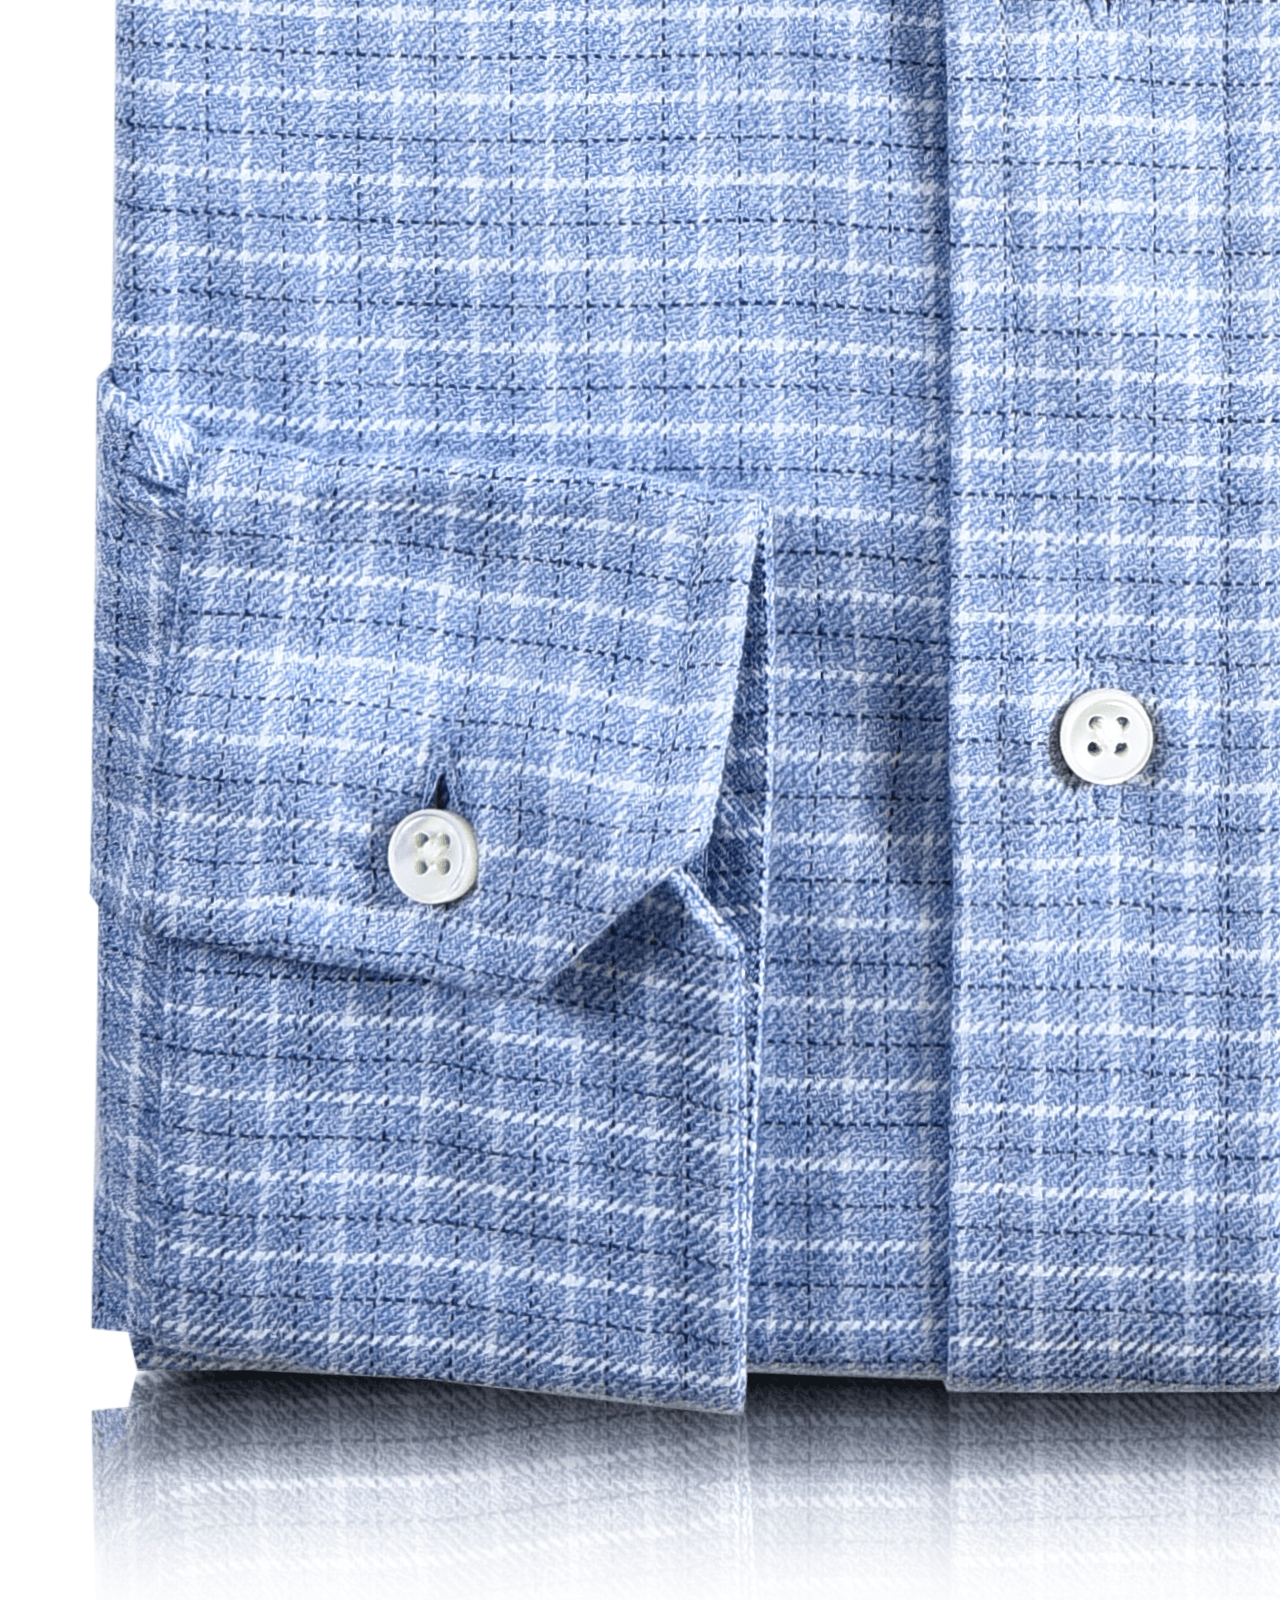 Close cuff view of custom check shirts for men by Luxire dark blue light blue and white